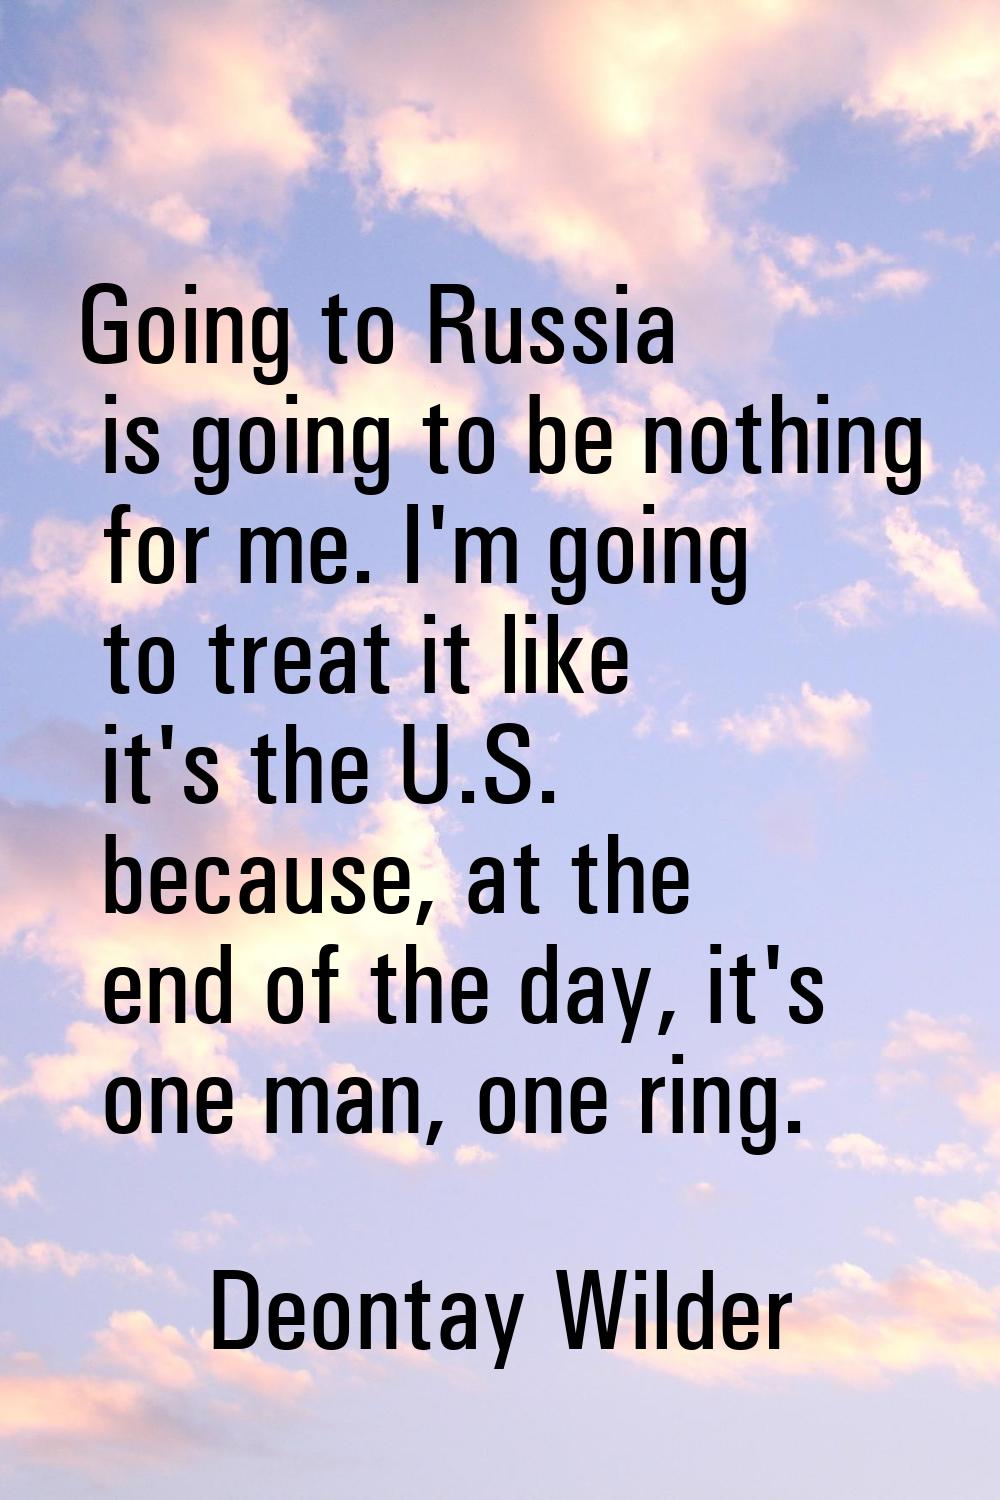 Going to Russia is going to be nothing for me. I'm going to treat it like it's the U.S. because, at